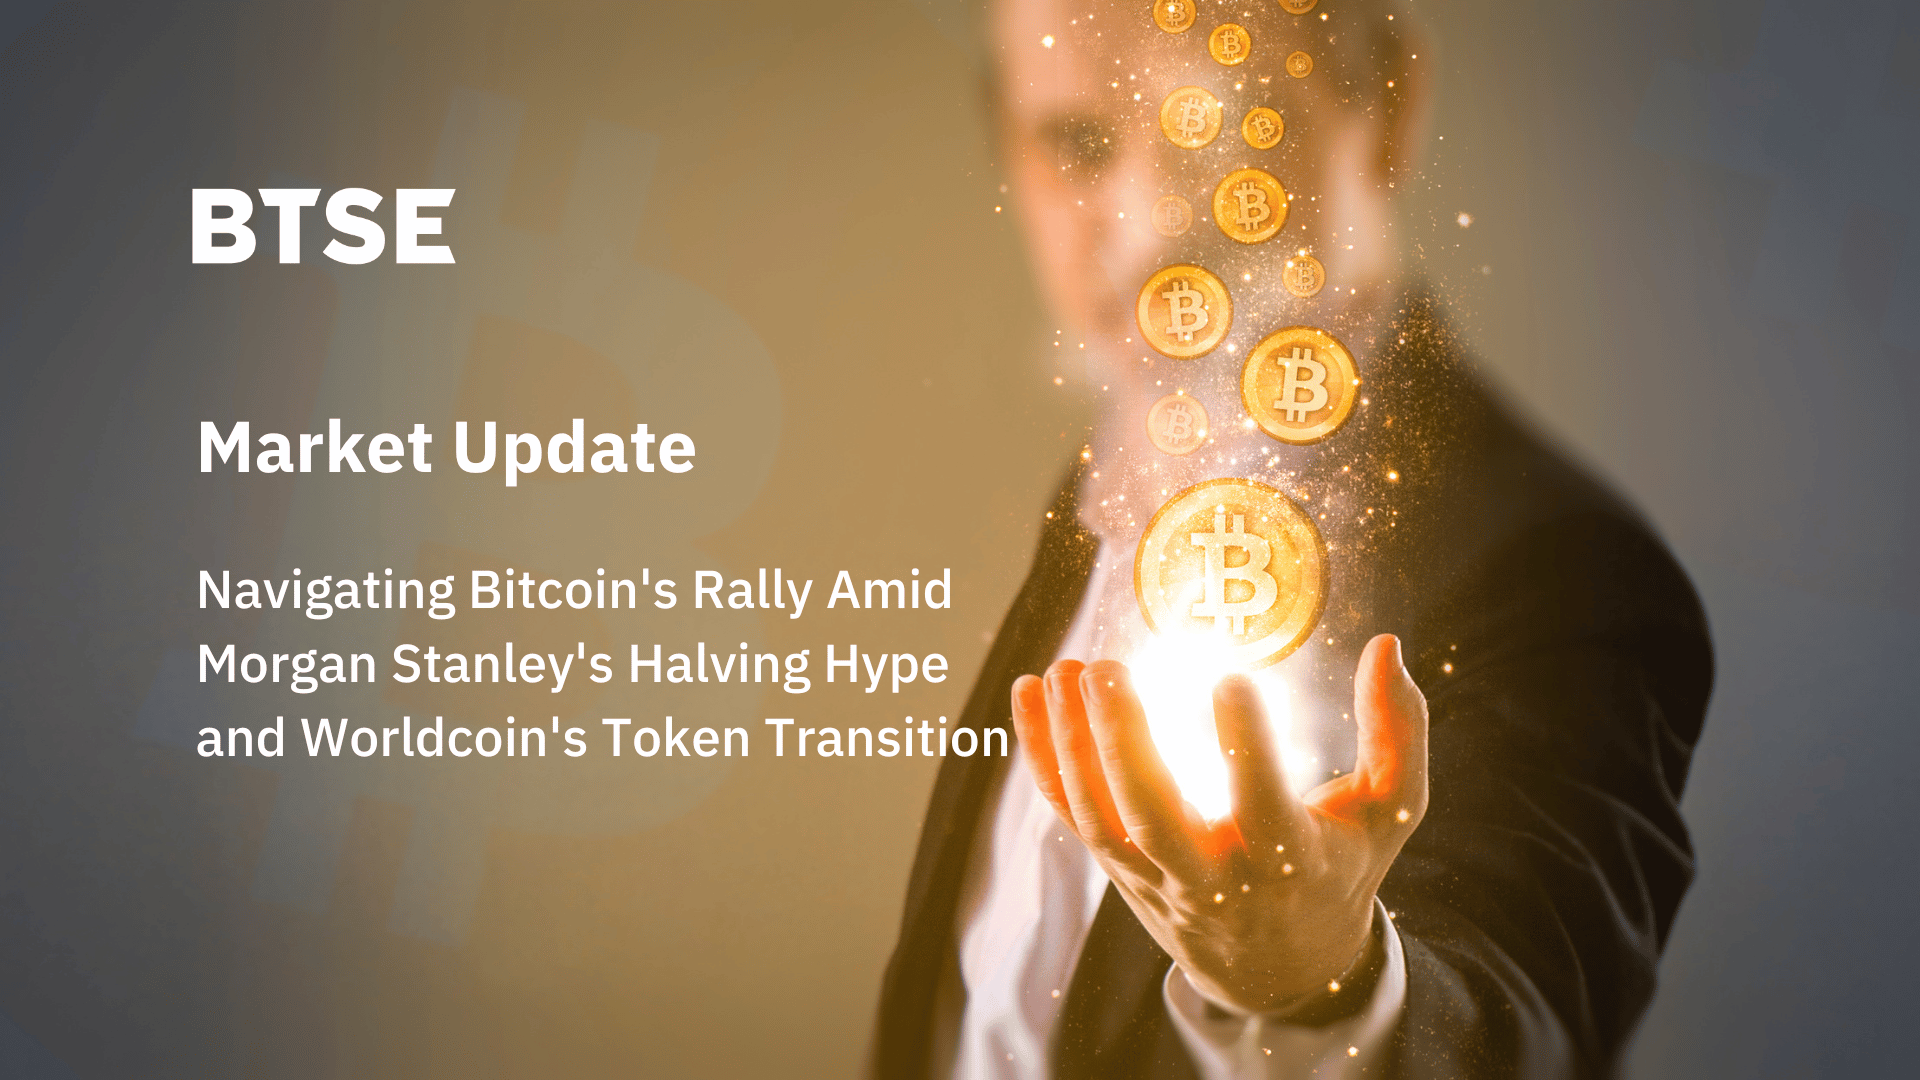 Navigating Bitcoin's Rally Amid Morgan Stanley's Halving Hype and Worldcoin's Token Transition